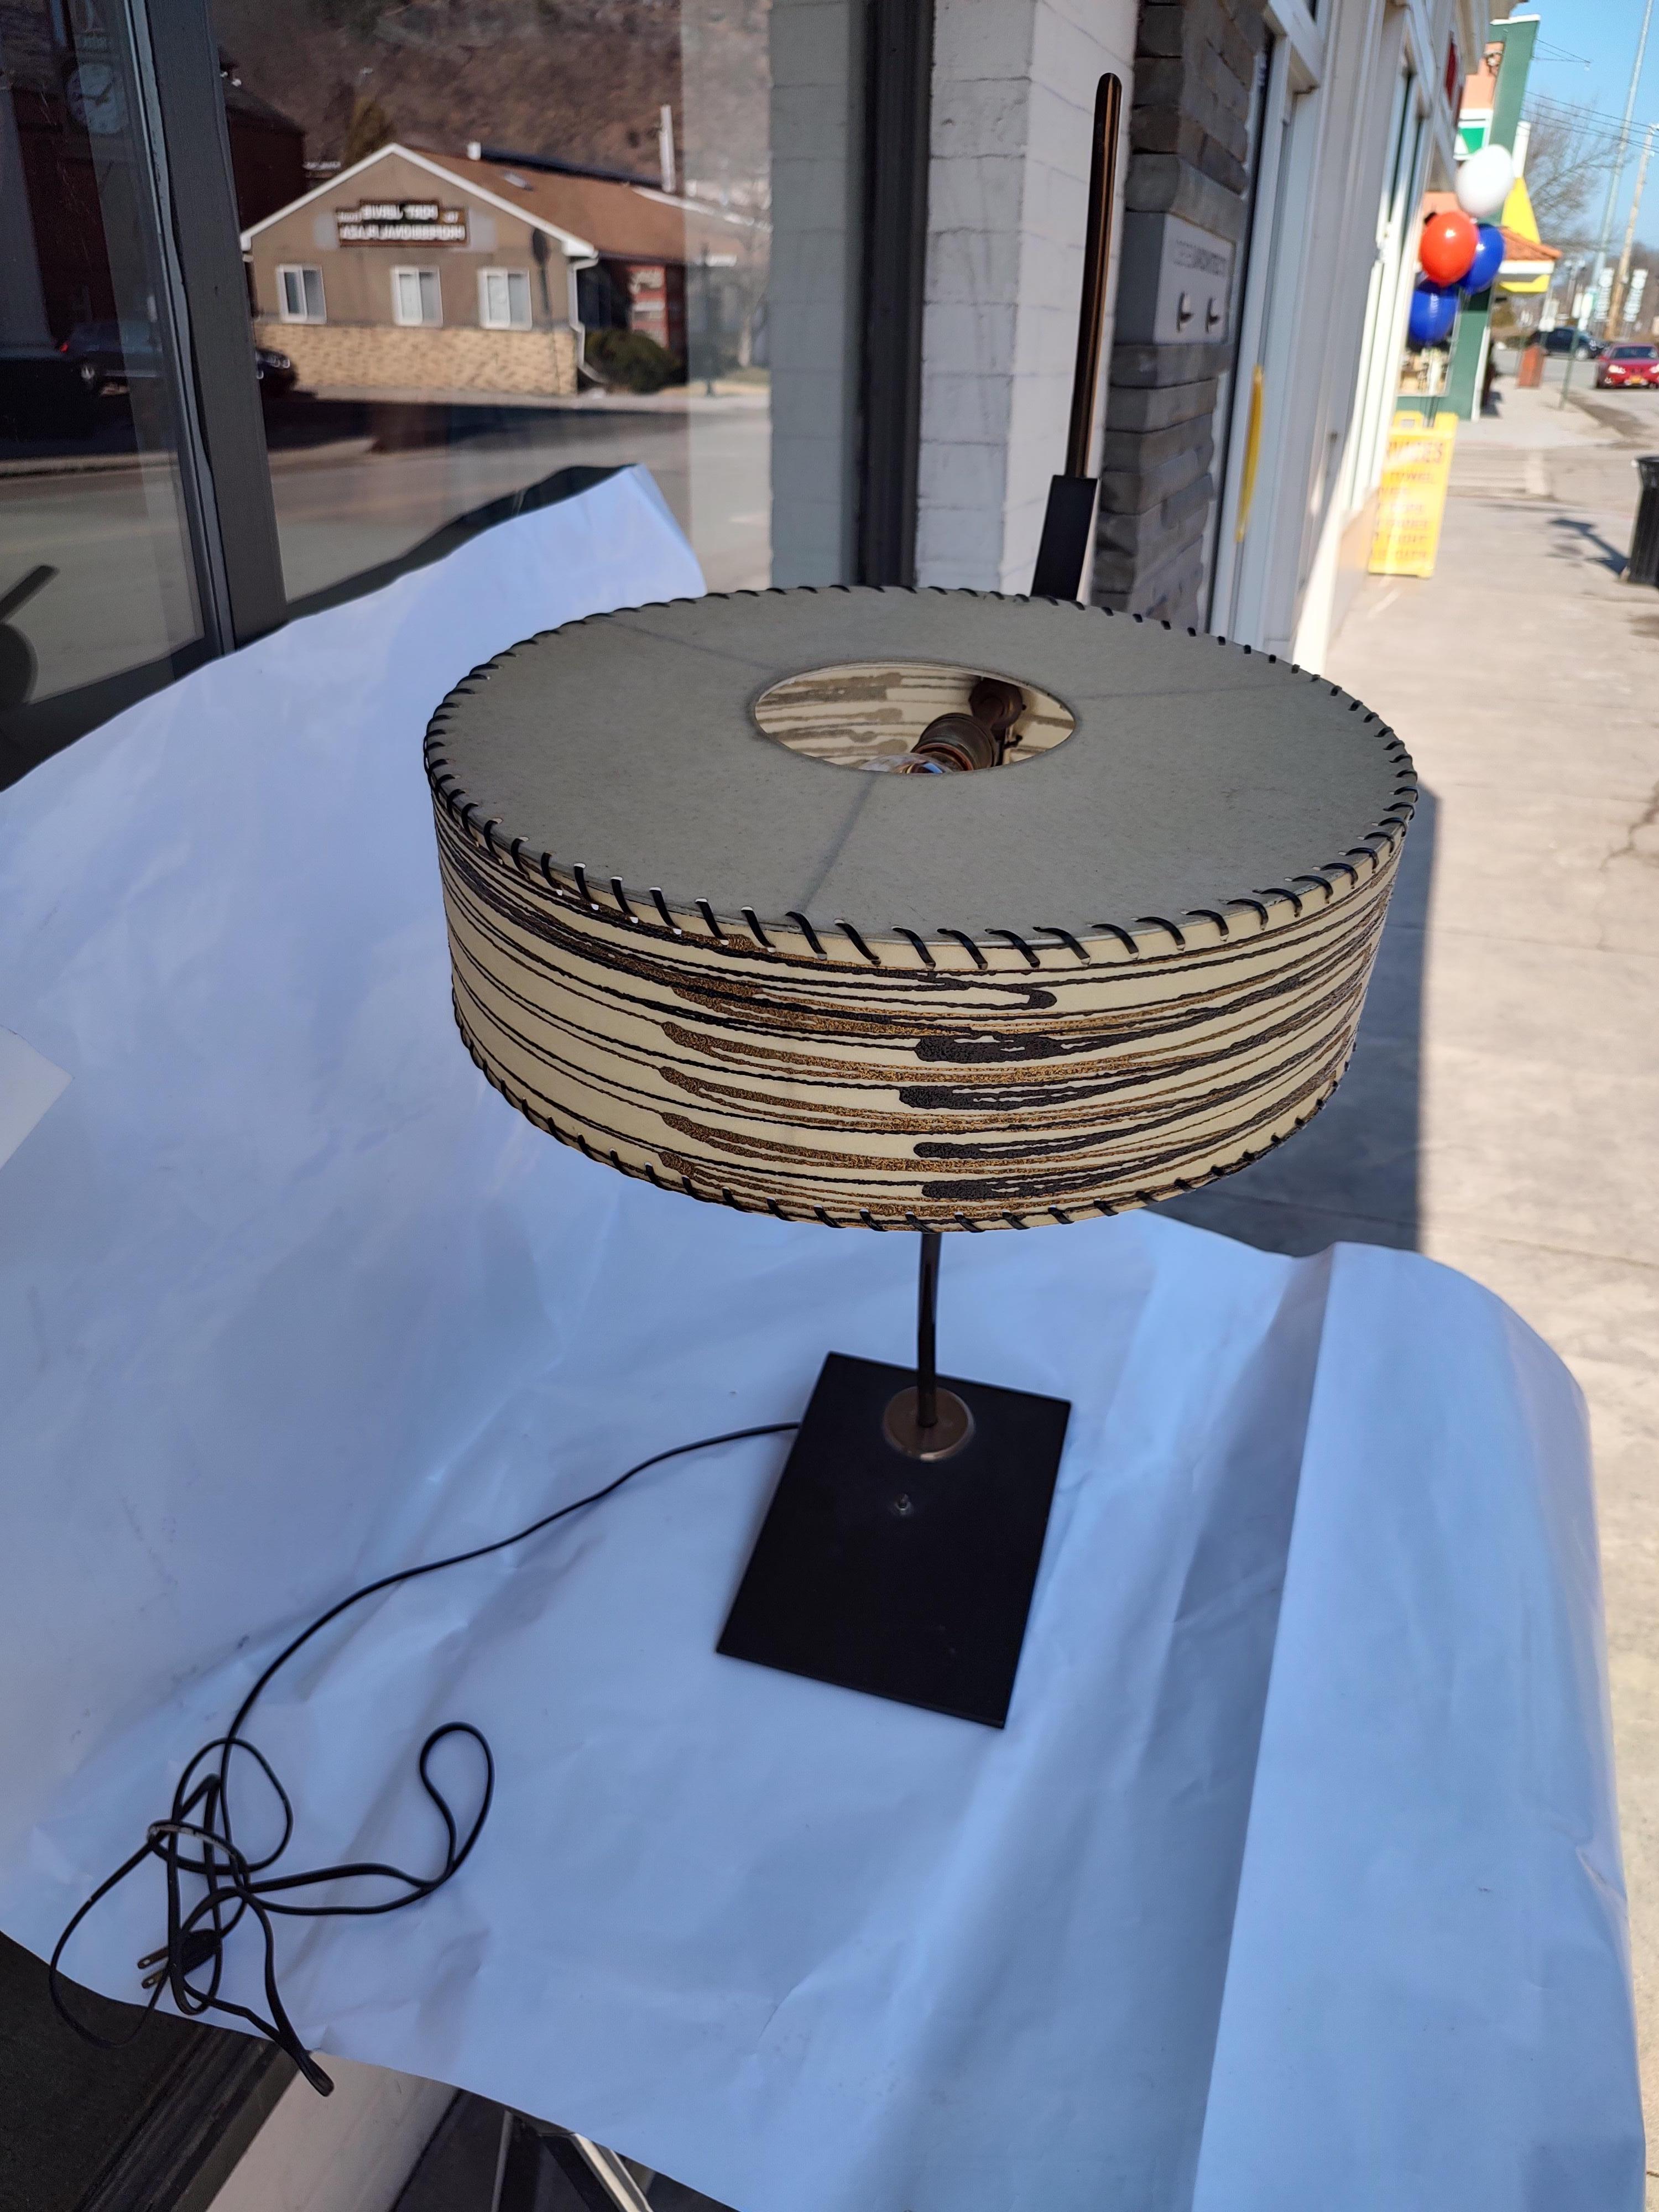 Mid-20th Century Mid-Century Modern Table Lamp with Tambourine Shades by Majestic Lamp Co.